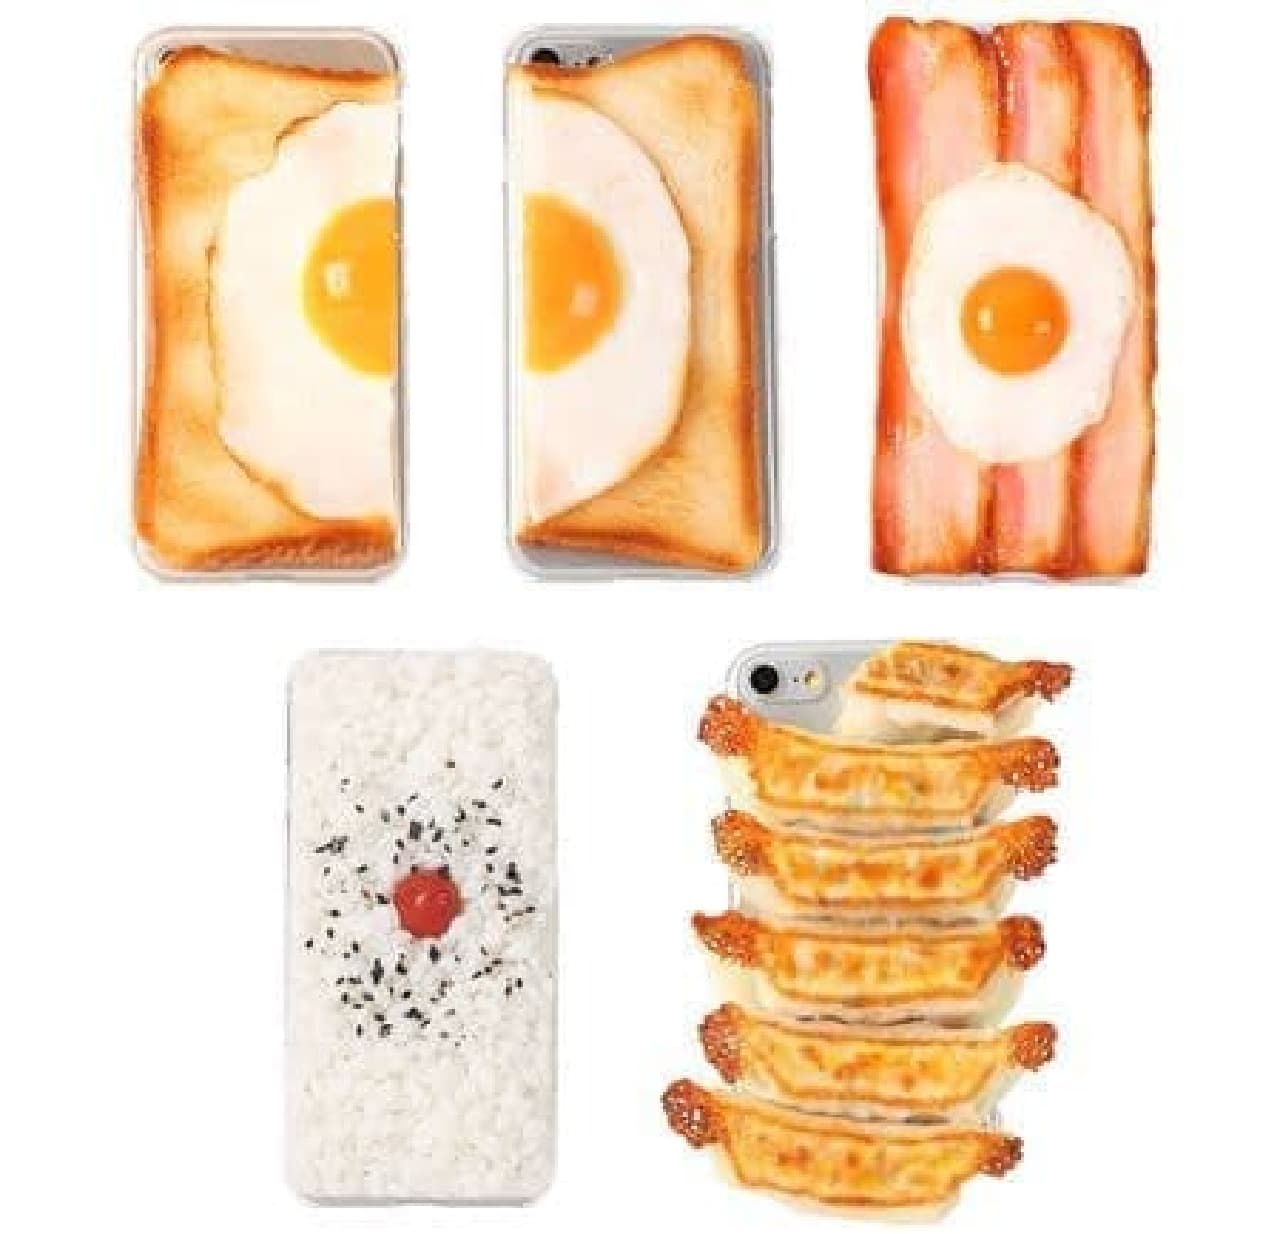 Food sample cover for iPhone 8/7